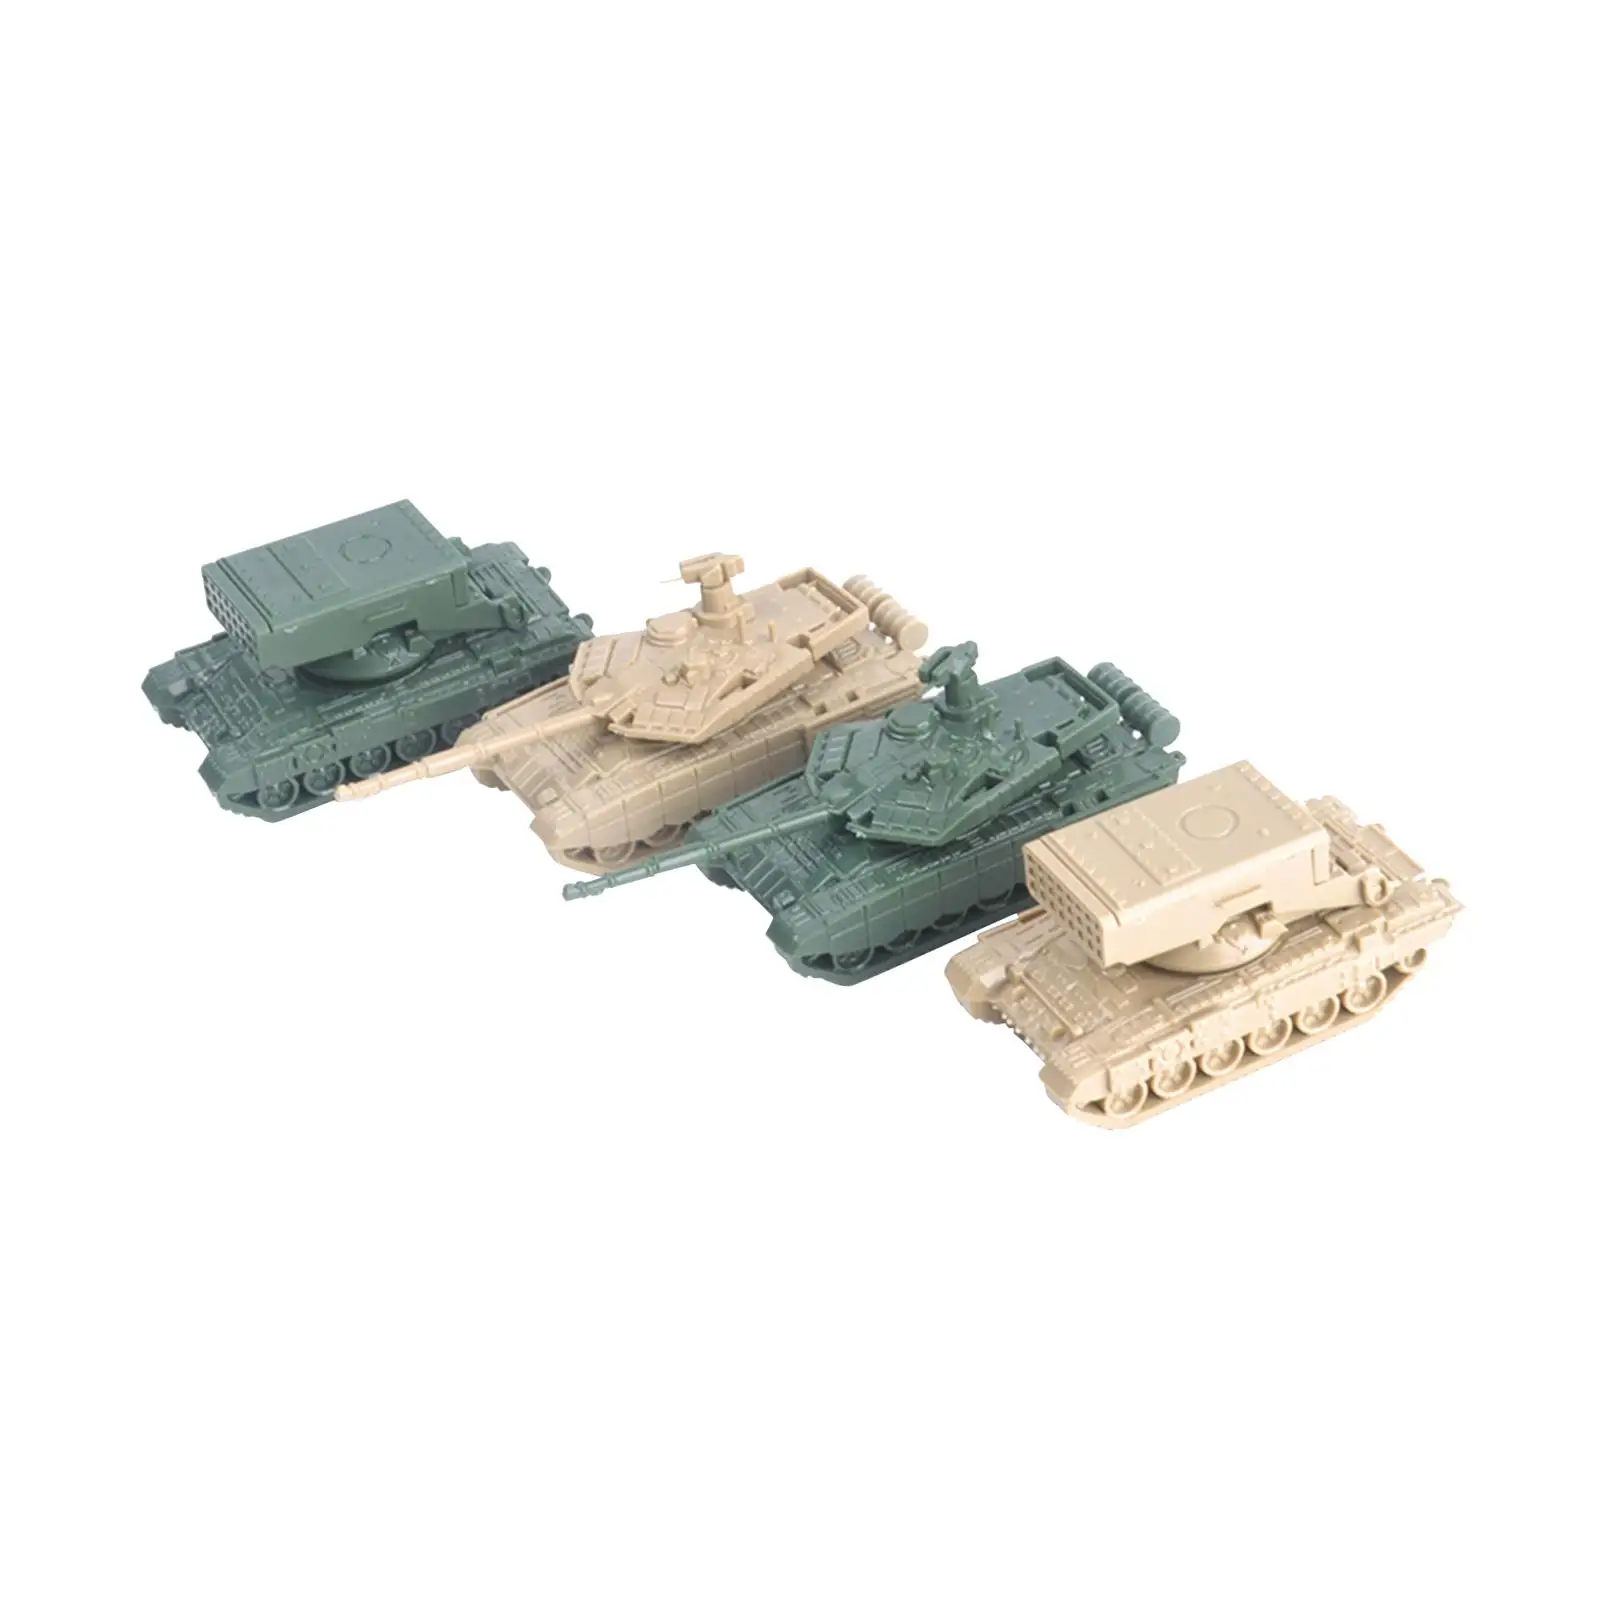 4Pcs 1:144 Scale DIY Tank Model Armored Vehicle Ornaments Miniature Tank Model Home Decor for Toddlers Girls Children Boys Kids